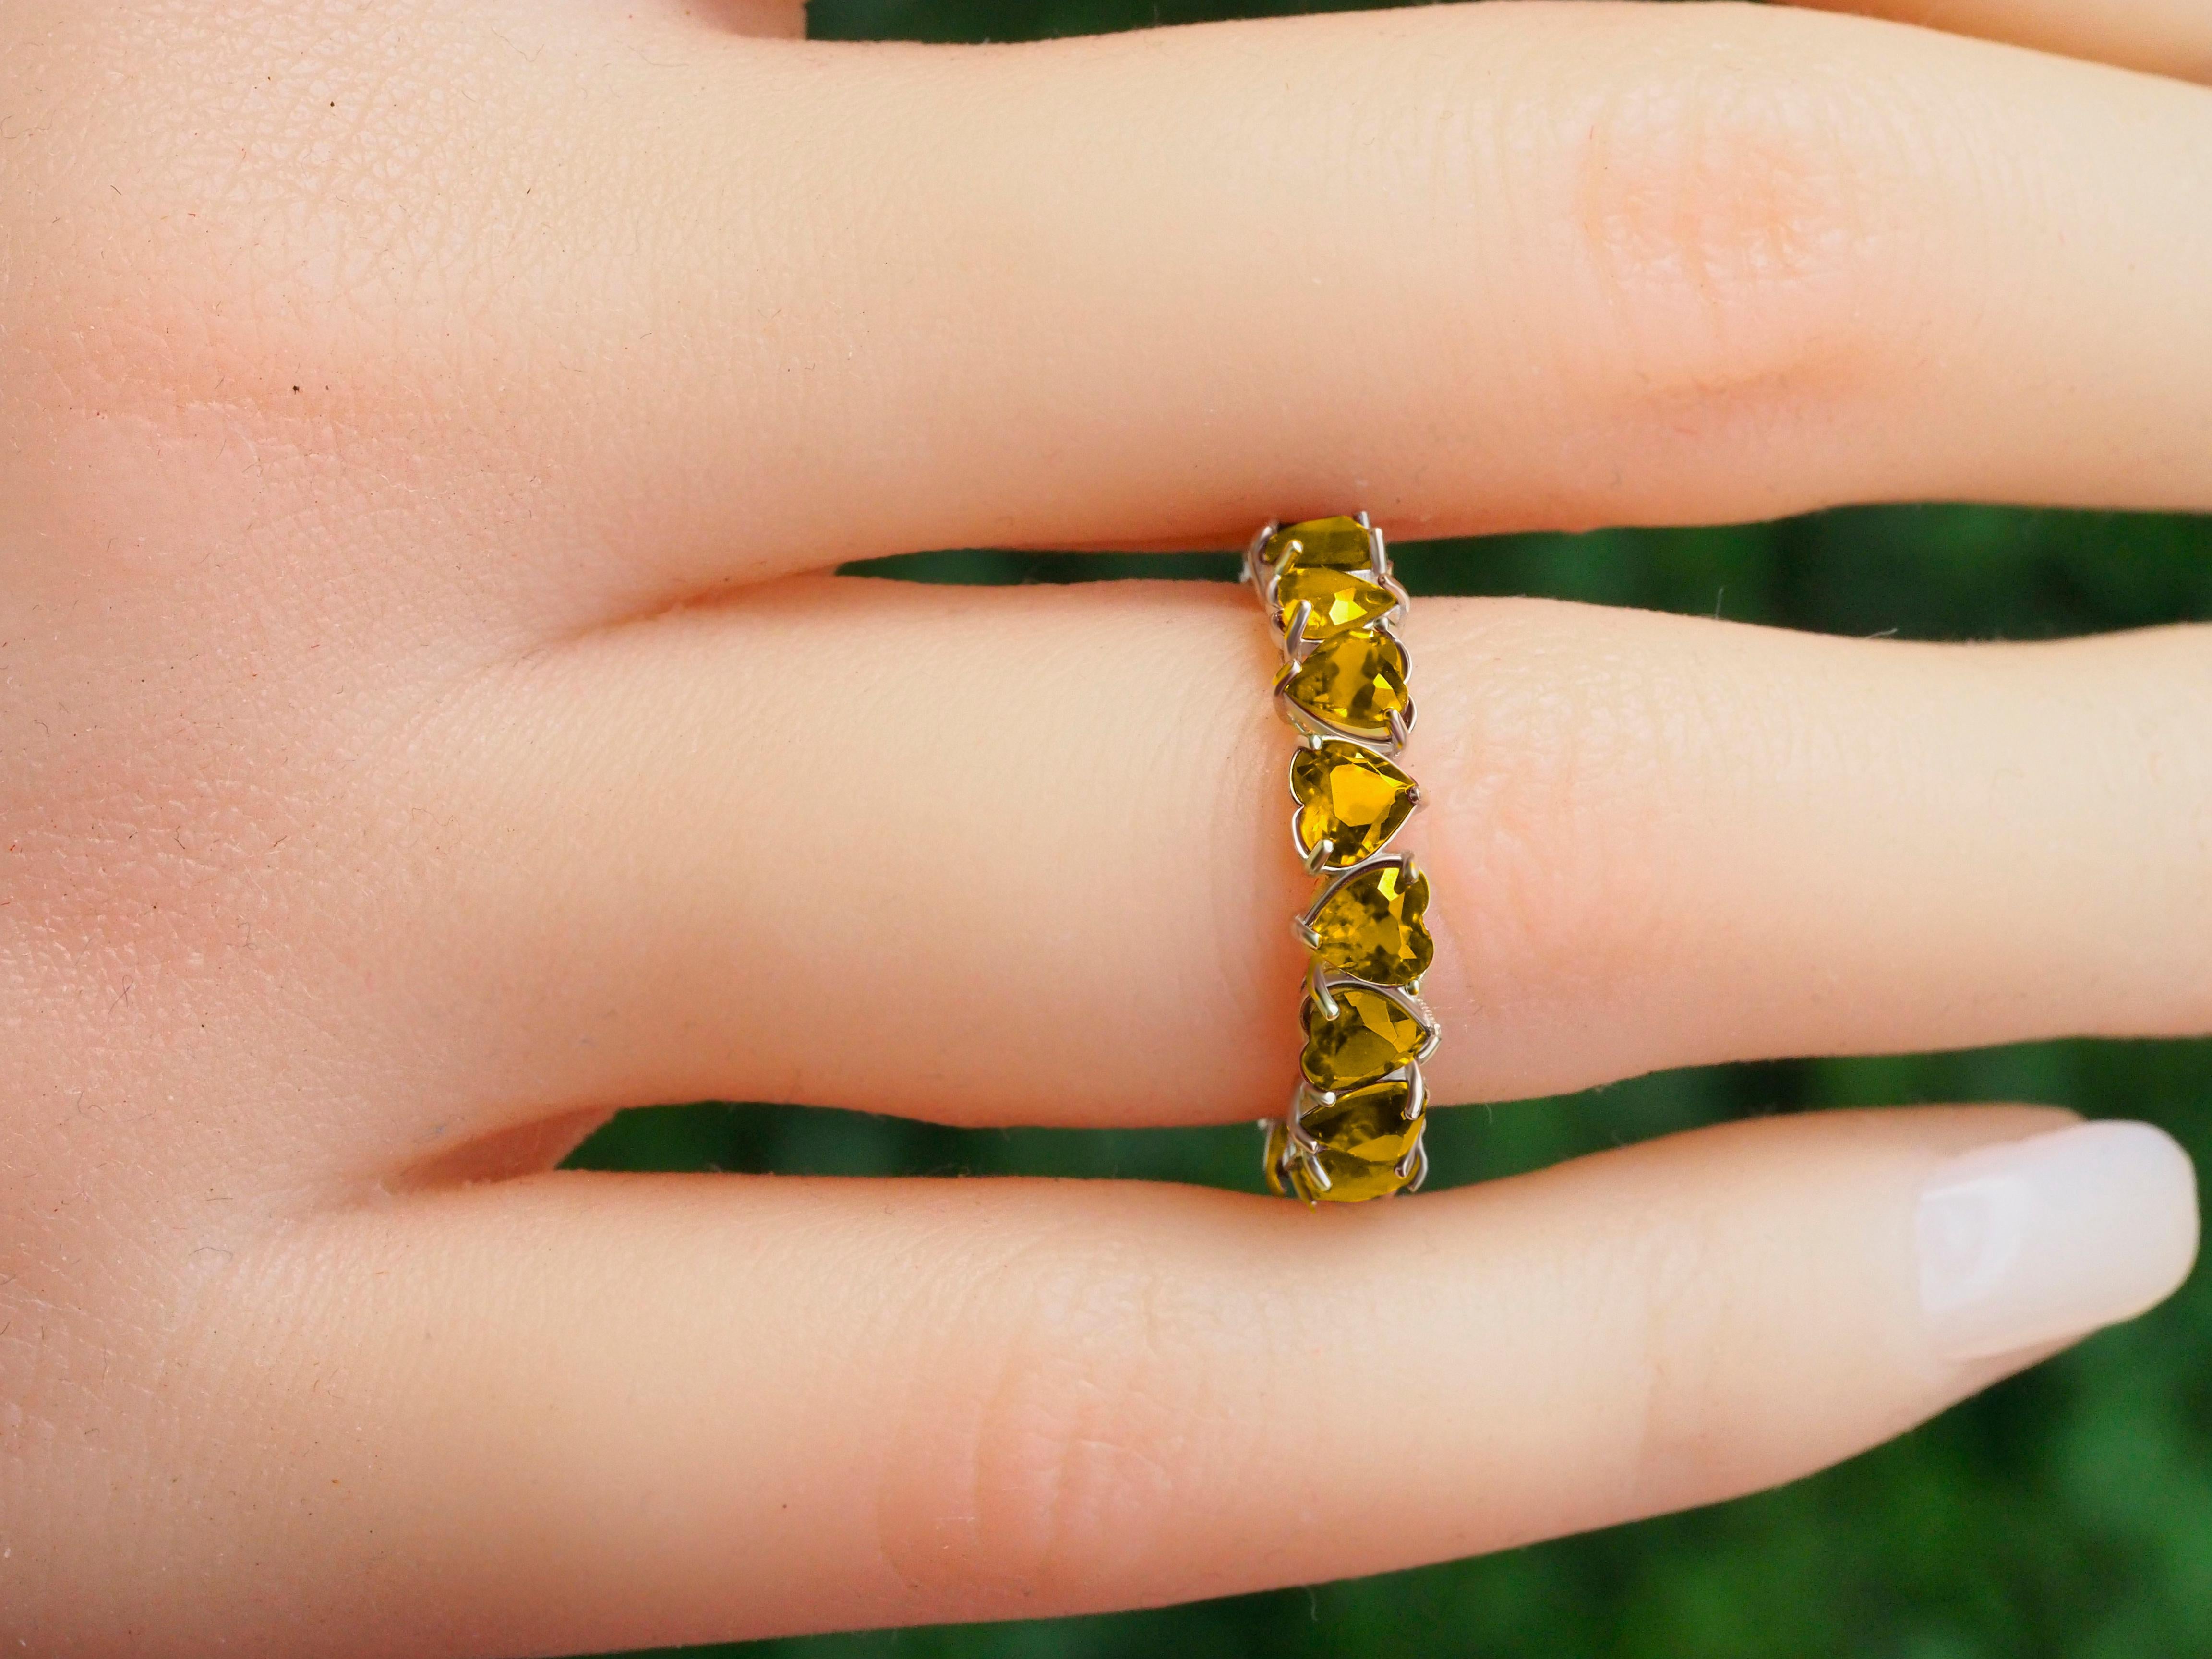 Heart citrine Eternity Ring in 14k gold. 
Heart Shaped Eternity Band. Wedding Band. Heart citrine Stacking Ring. Valentine gift. Love ring.

Metal: 14k gold
Weight: 2.2 g. (depends from size).

Gemstones:
Natural Citrines: weight - approx 7 ct